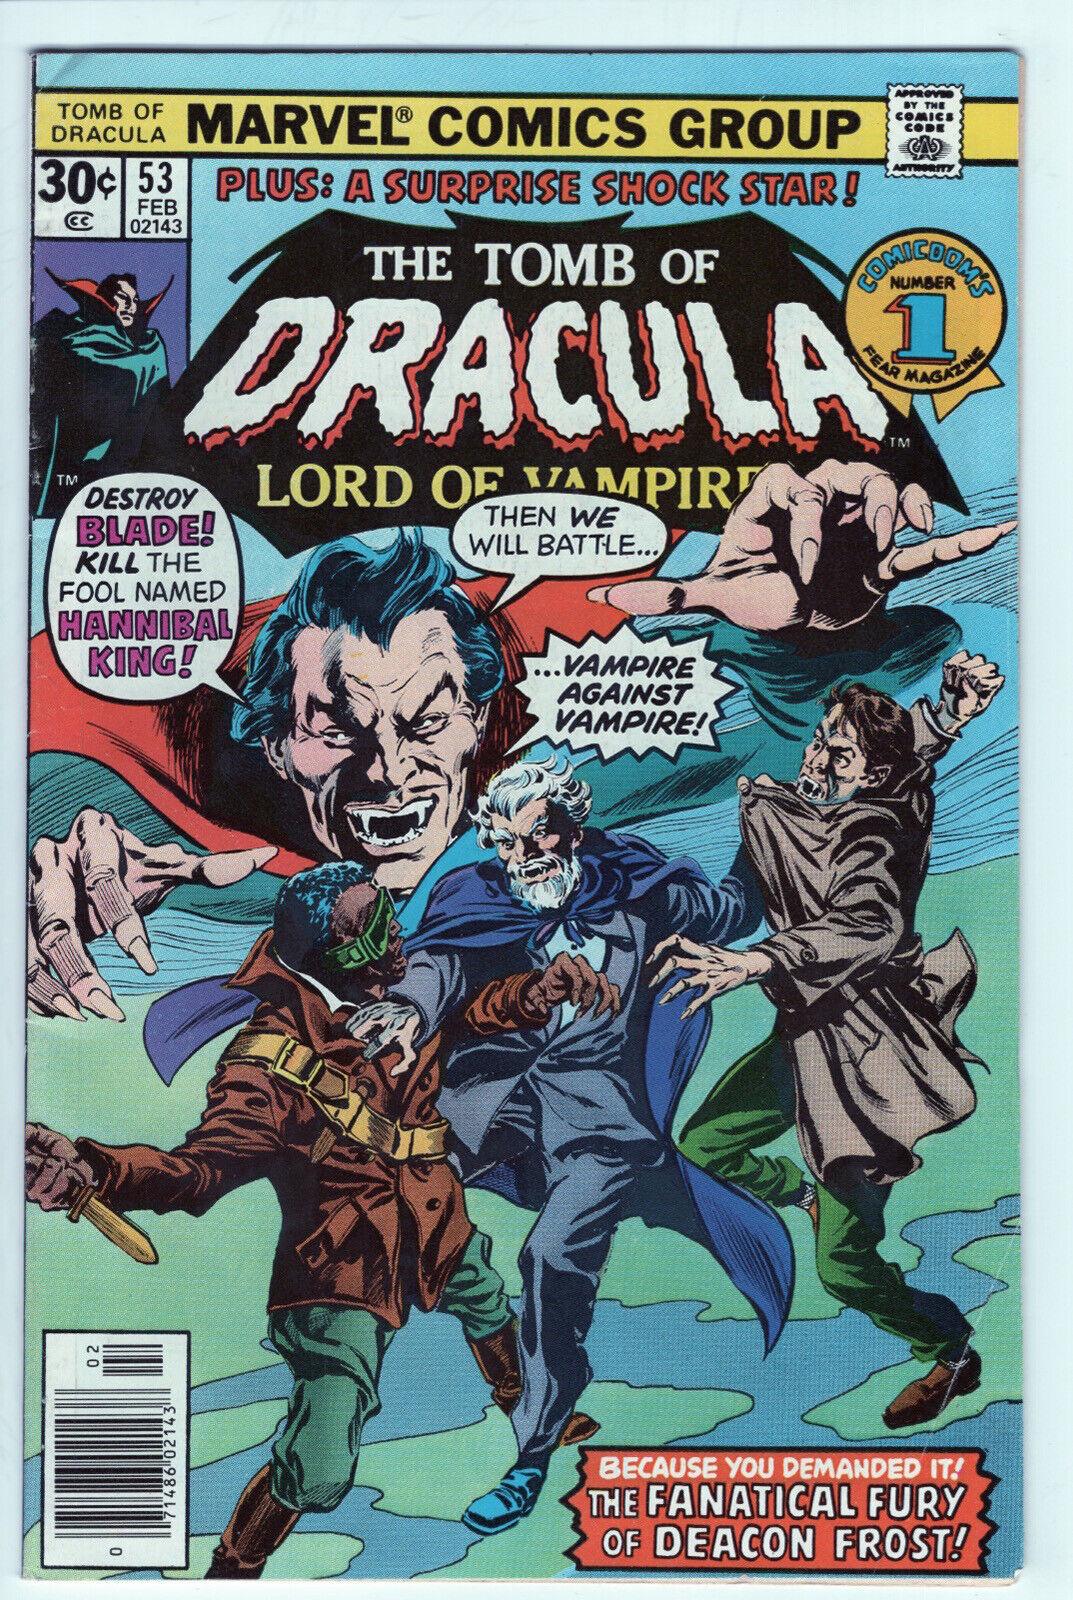 TOMB OF DRACULA #53 - 4.0 - WP  - Blade - Hannibal King VS Deacon Frost 